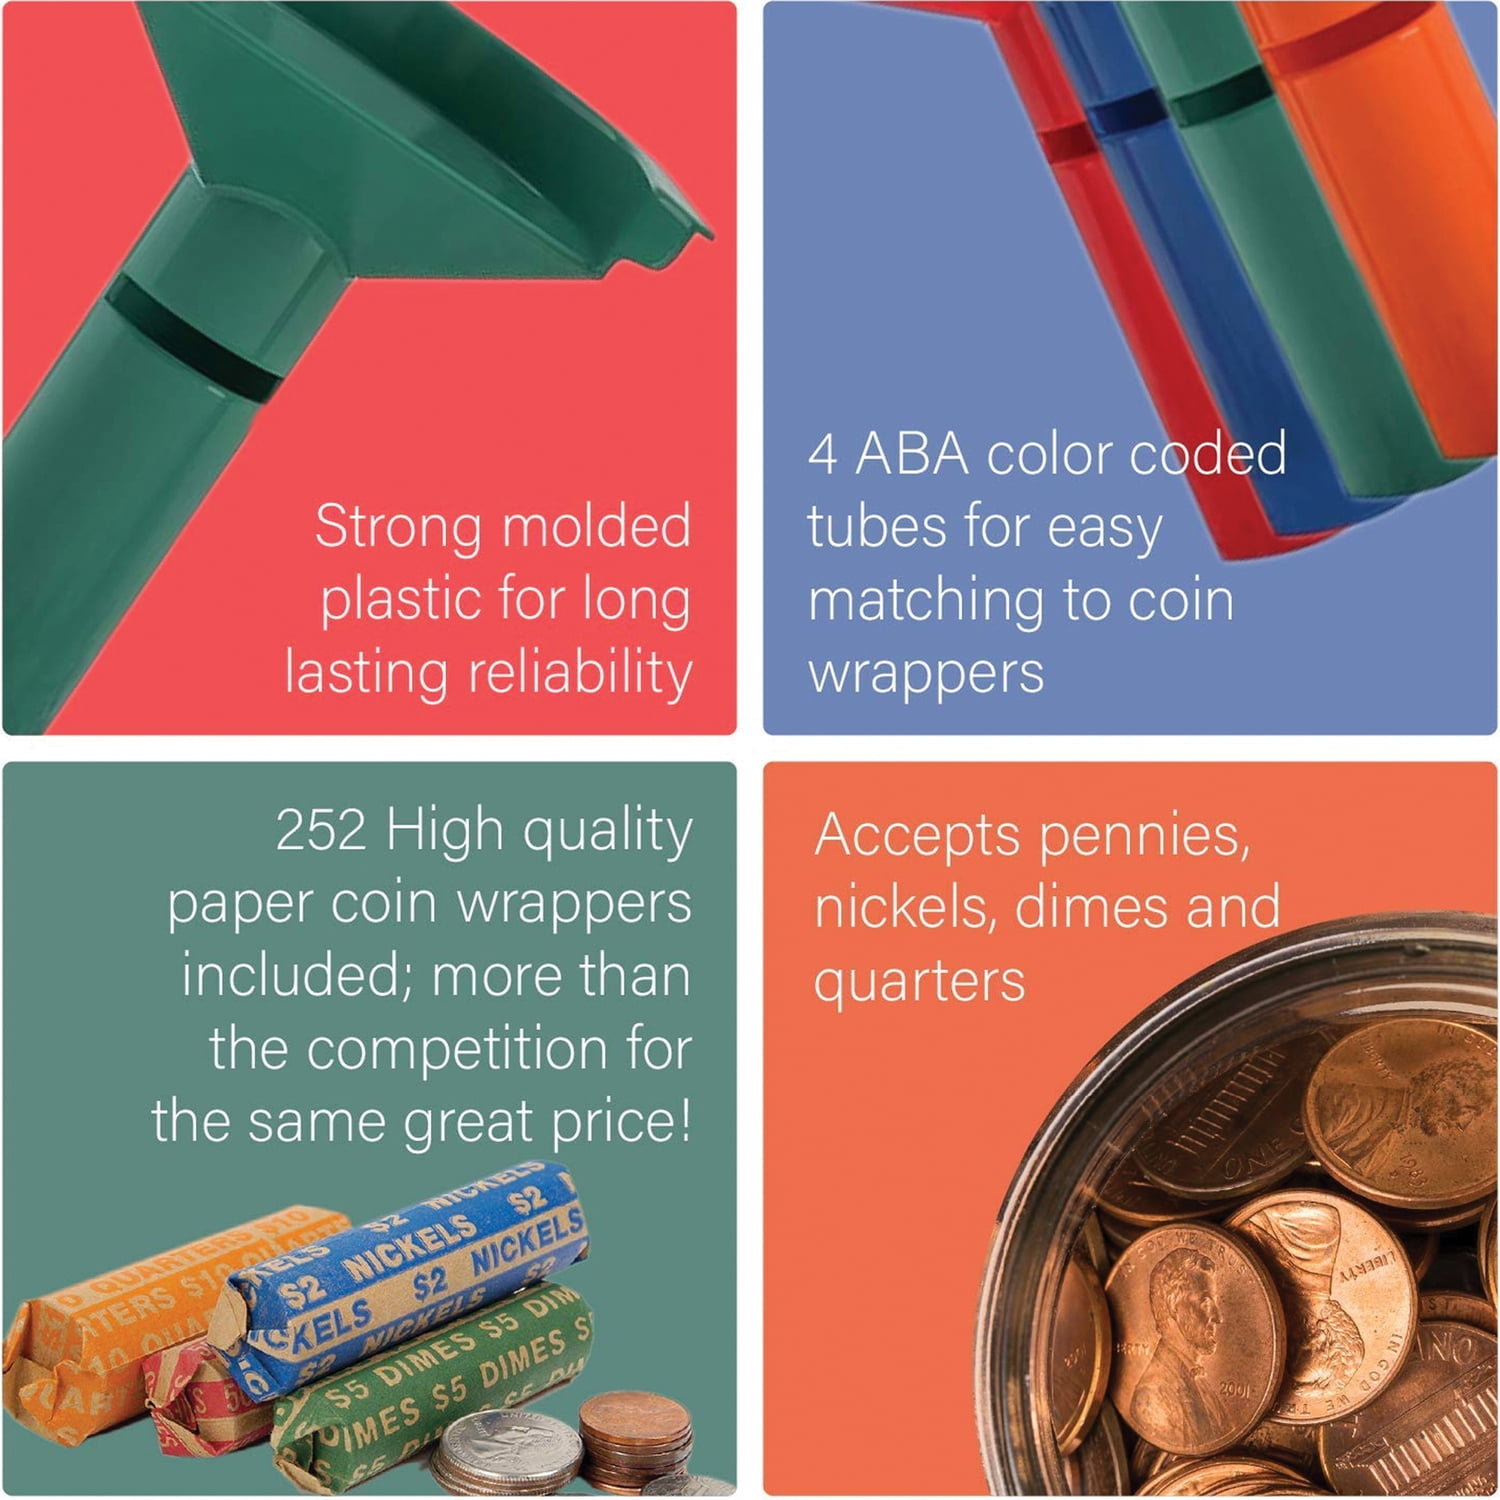 Wrap Coin Stacking Tubes With 252 Coin Wrappers Funnel Shaped Color Coded New 